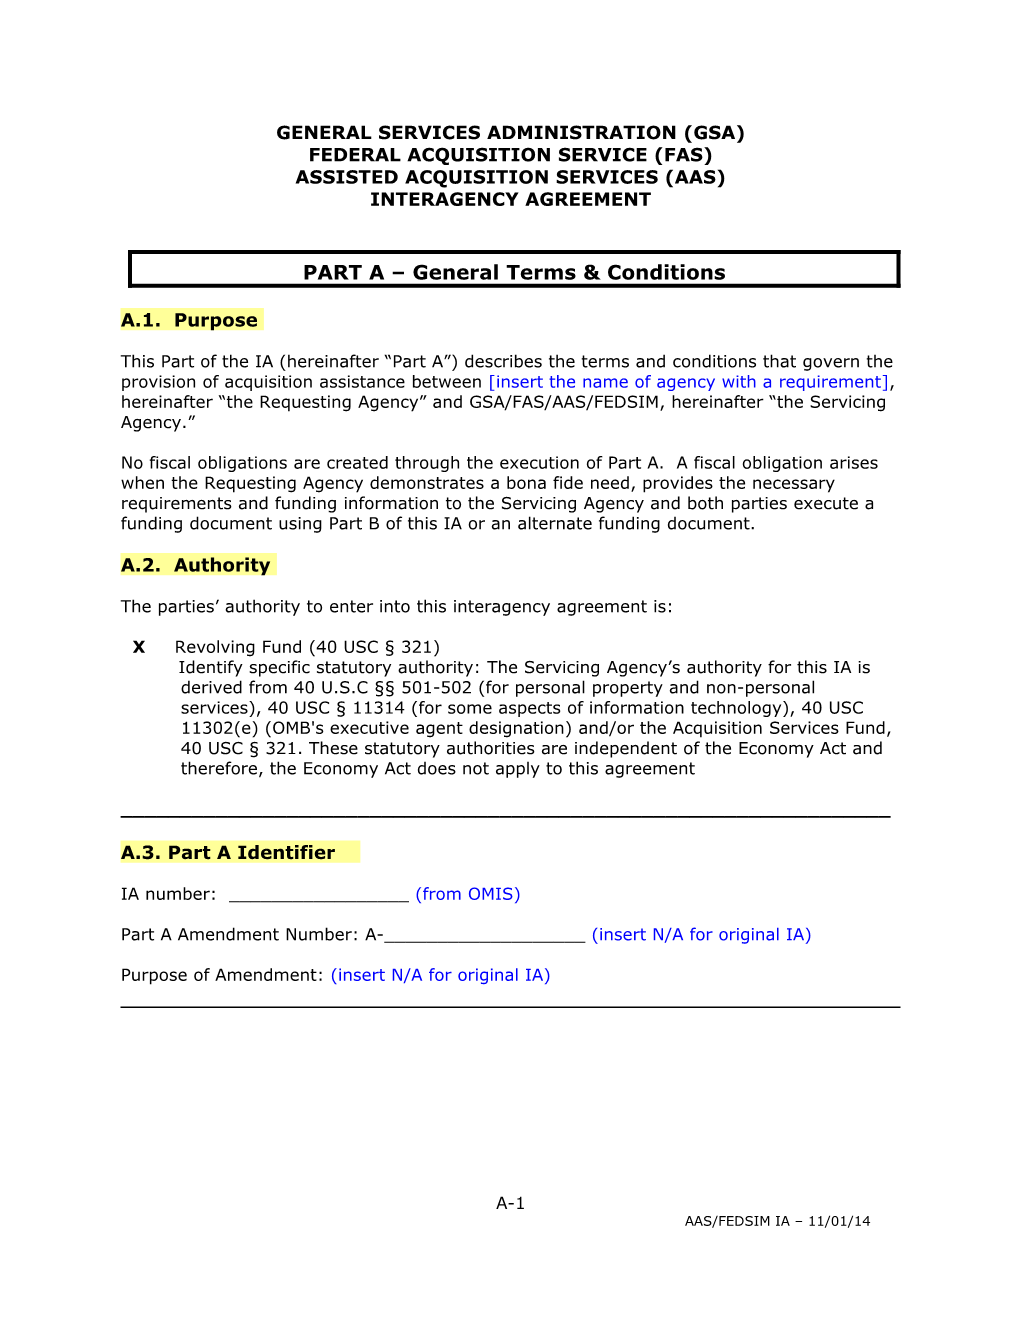 Model Interagency Agreement for an Assisted Acquisition